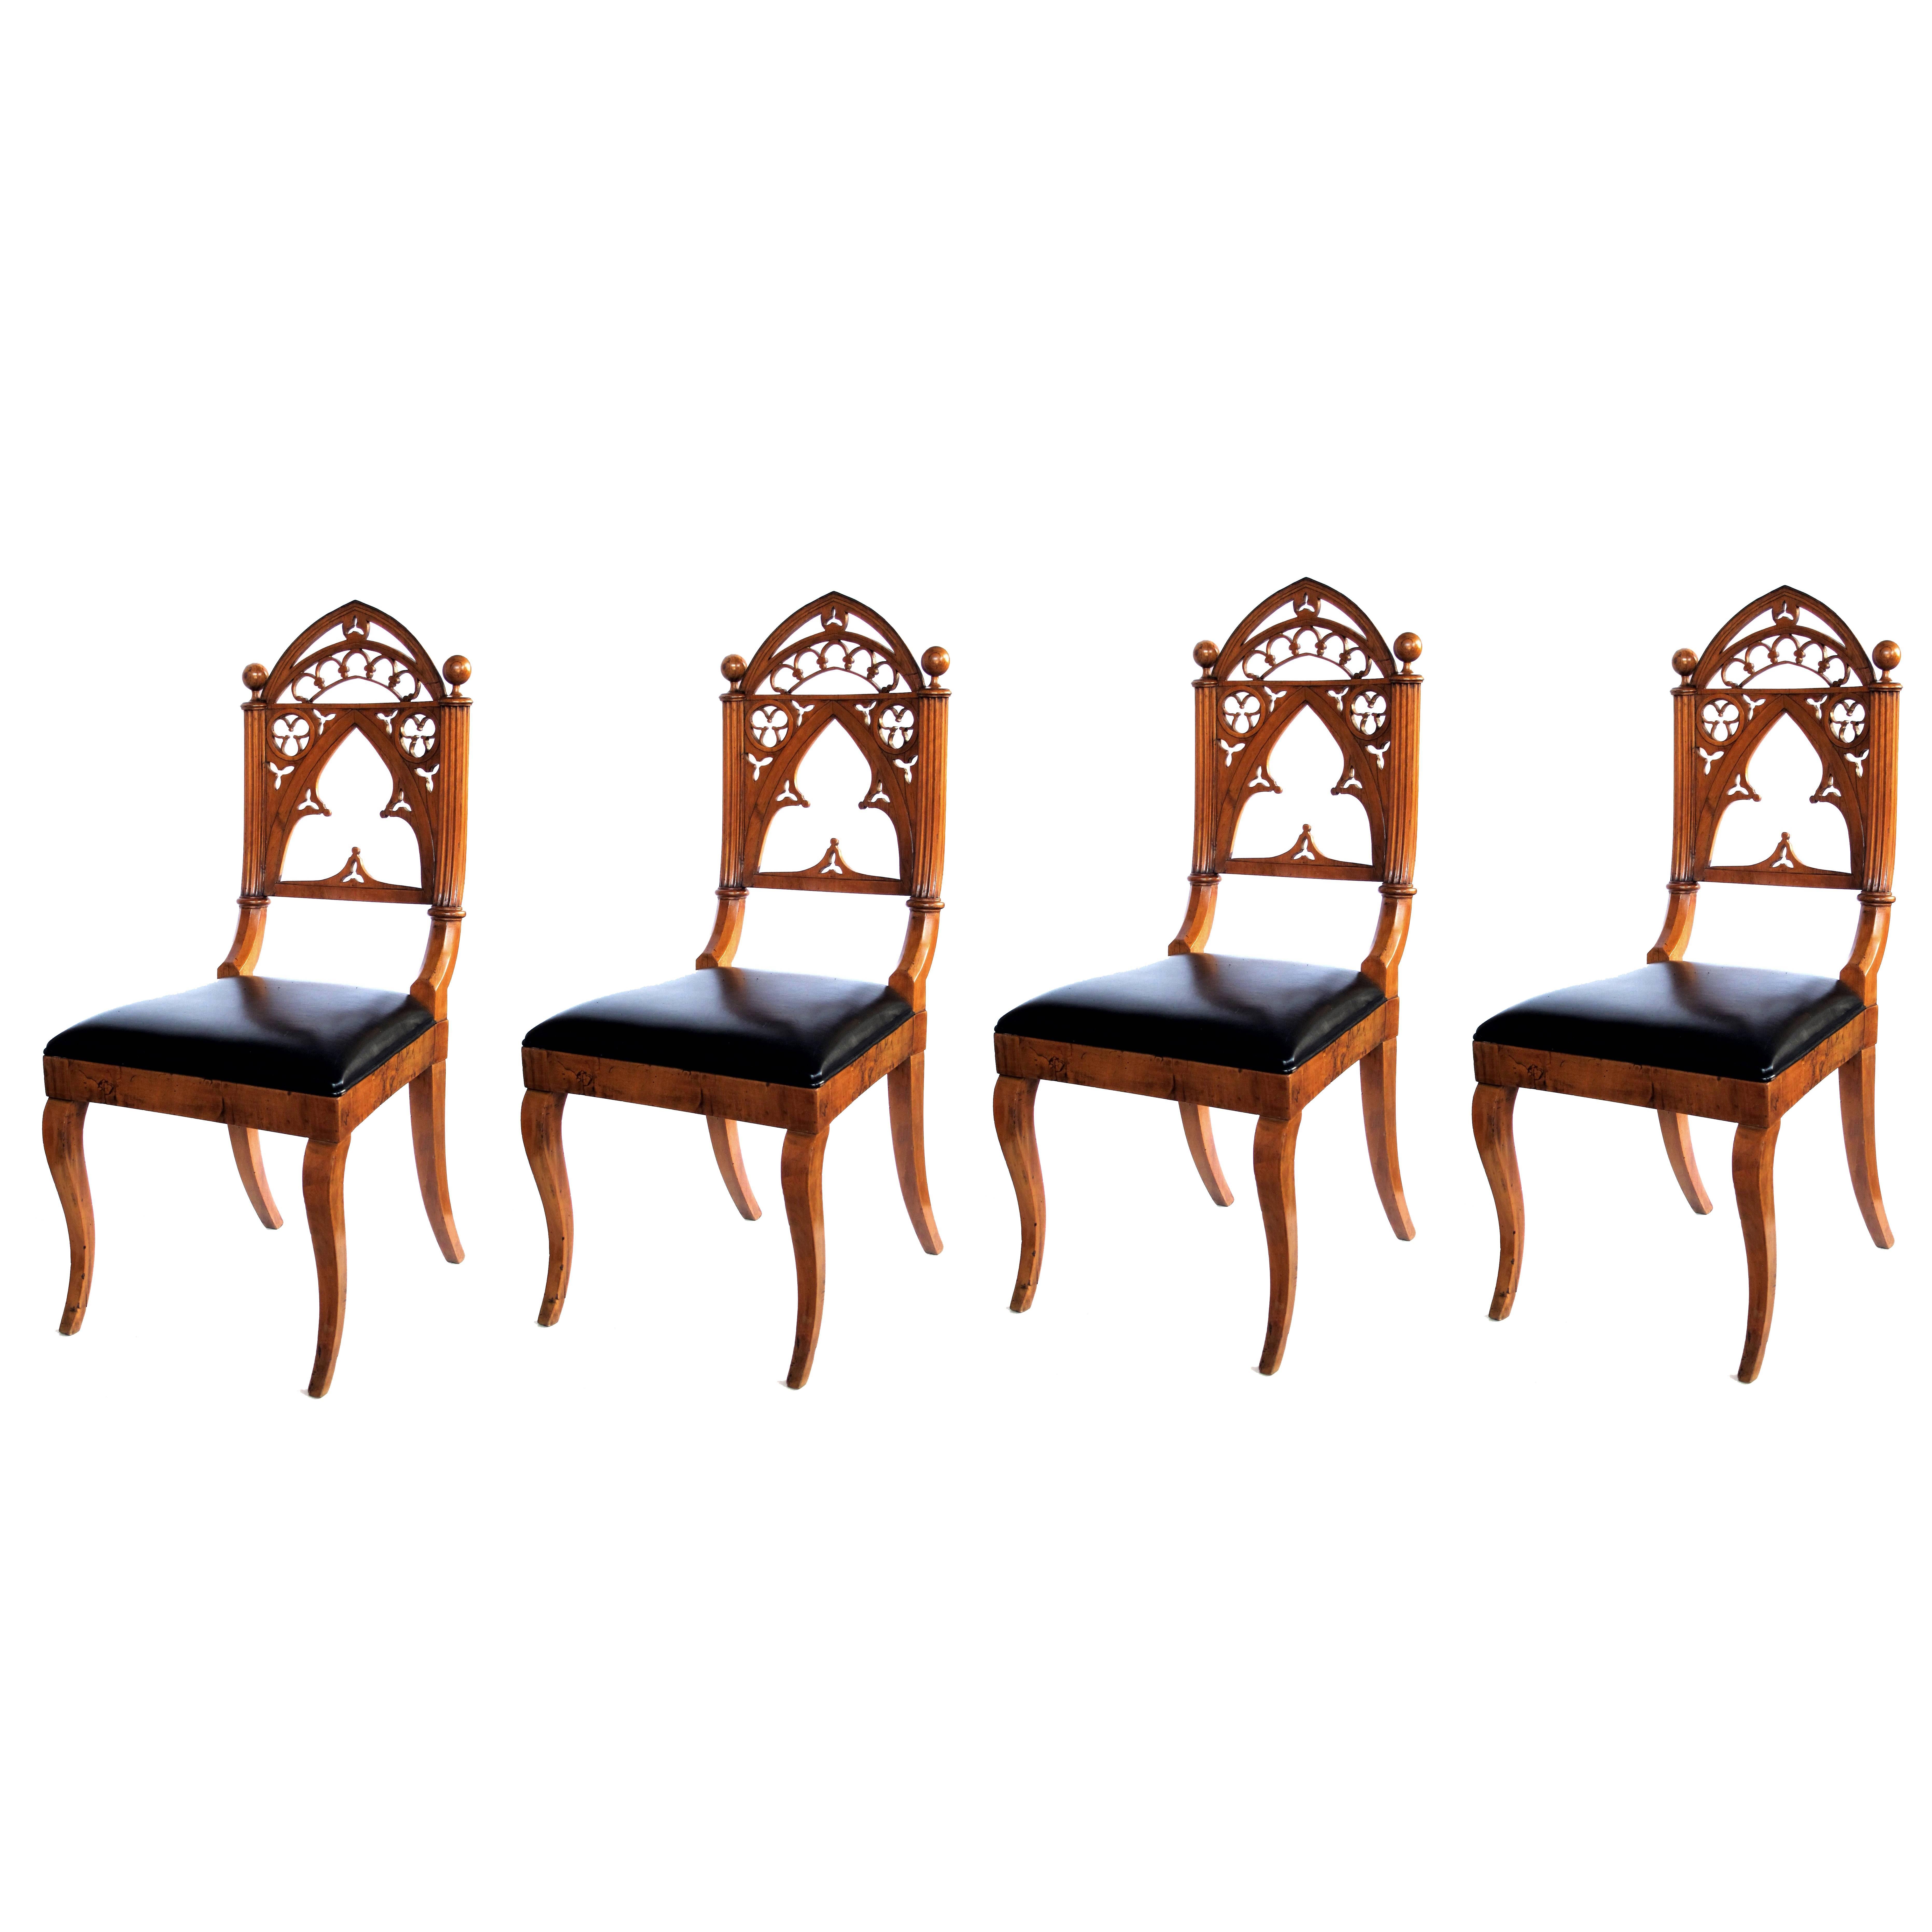 Well-Carved Set of Four Gothic Revival Klismos-Form Walnut Side Chairs